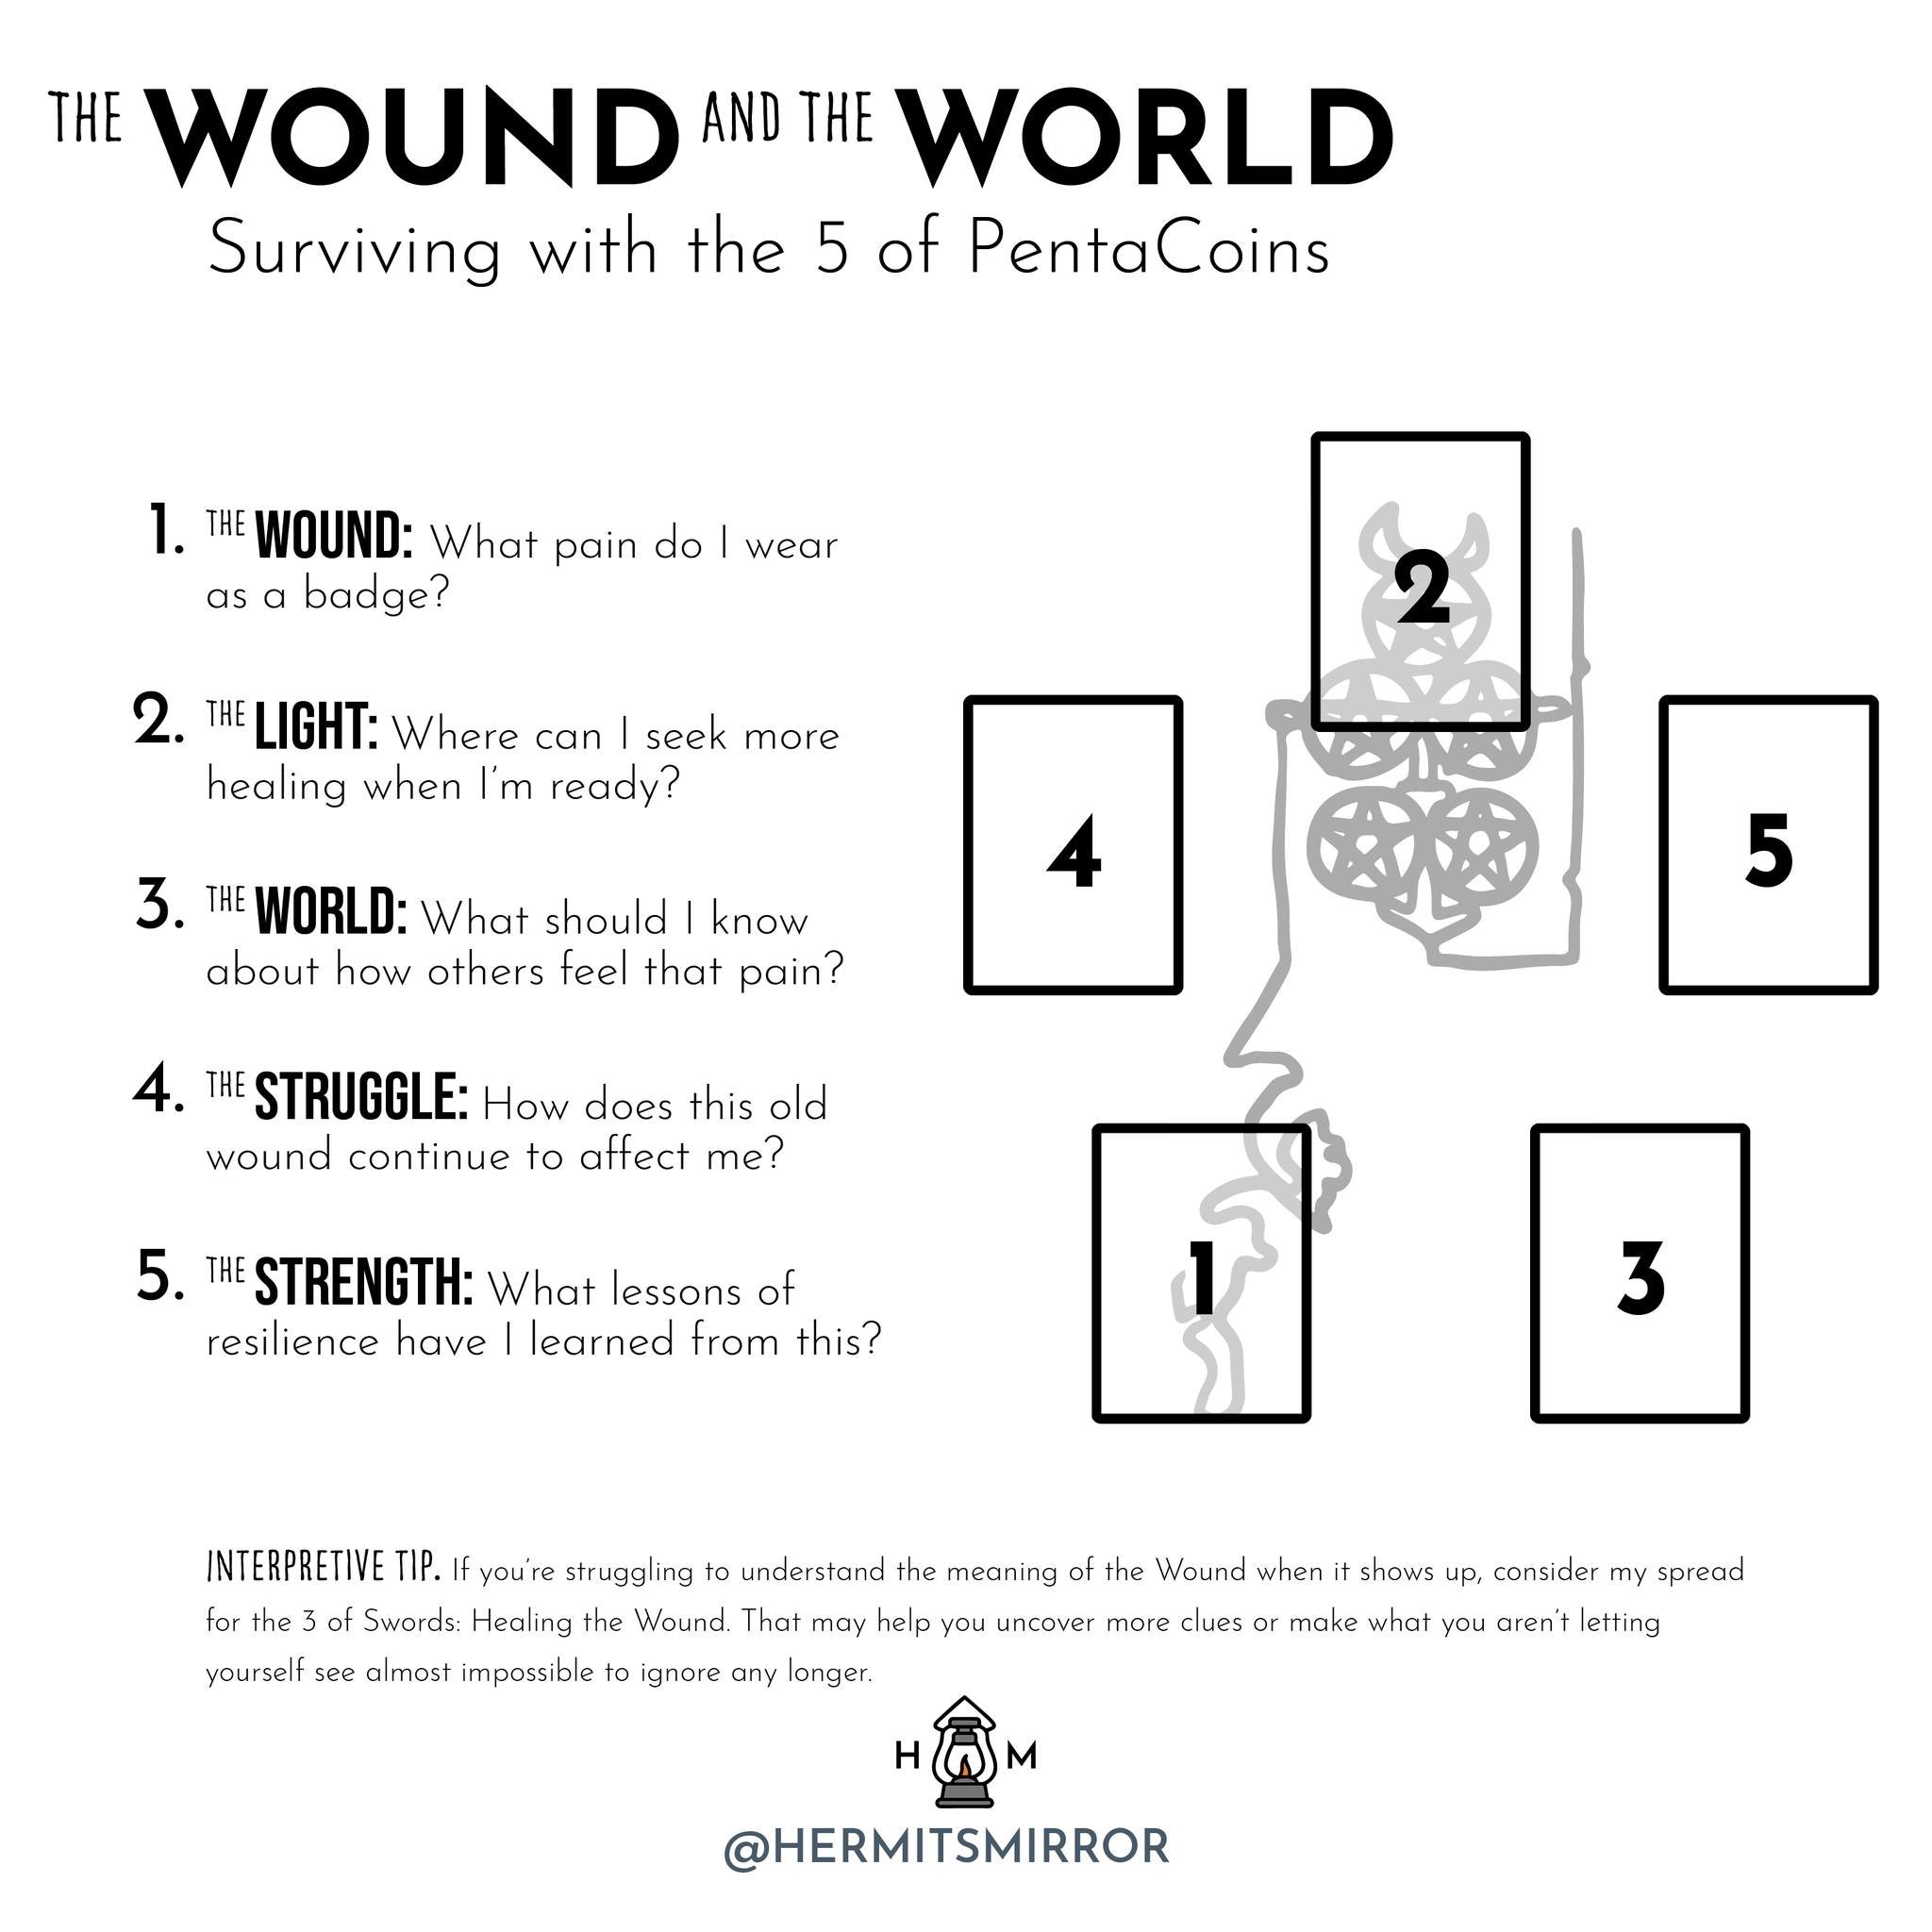 The Wound and the World
A spread for Surviving with the 5 of Pentacles

The 5 of Pentacles / Coins / Disks is a challenging card to see in a reading and worse to feel as we&rsquo;re moving through its energy. But there&rsquo;s also a lesson in the ca